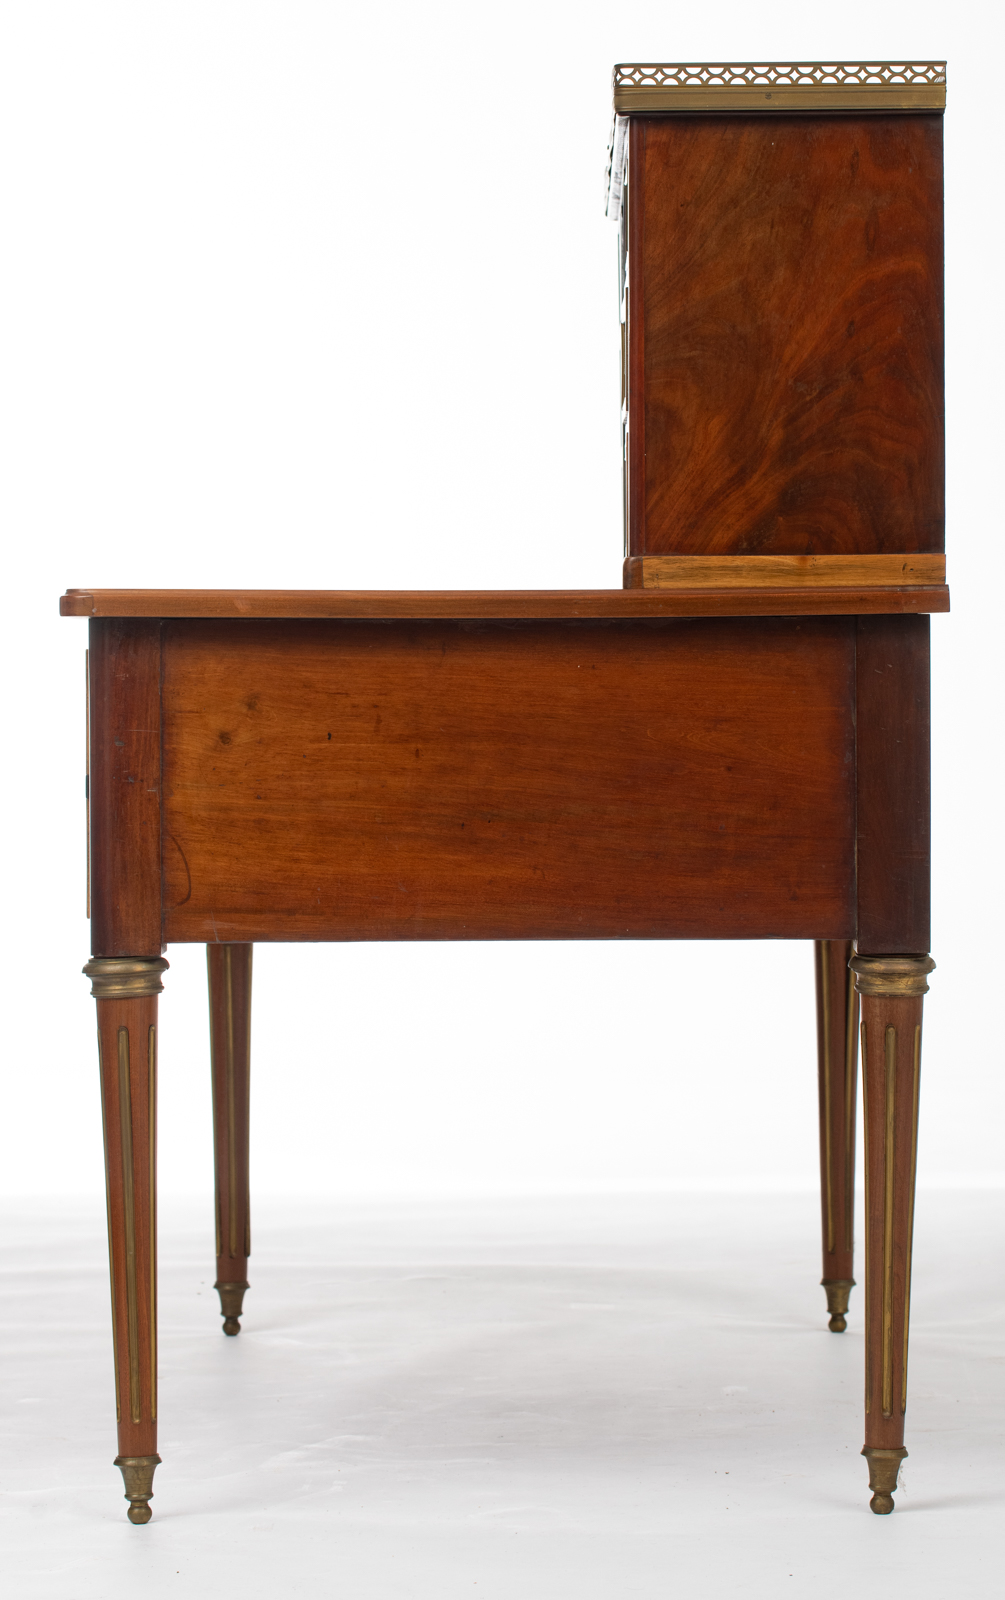 A Louis XVI style mahogany and rosewood 'bureau à gradin' with brass mounts and inlay banding, leath - Image 3 of 6